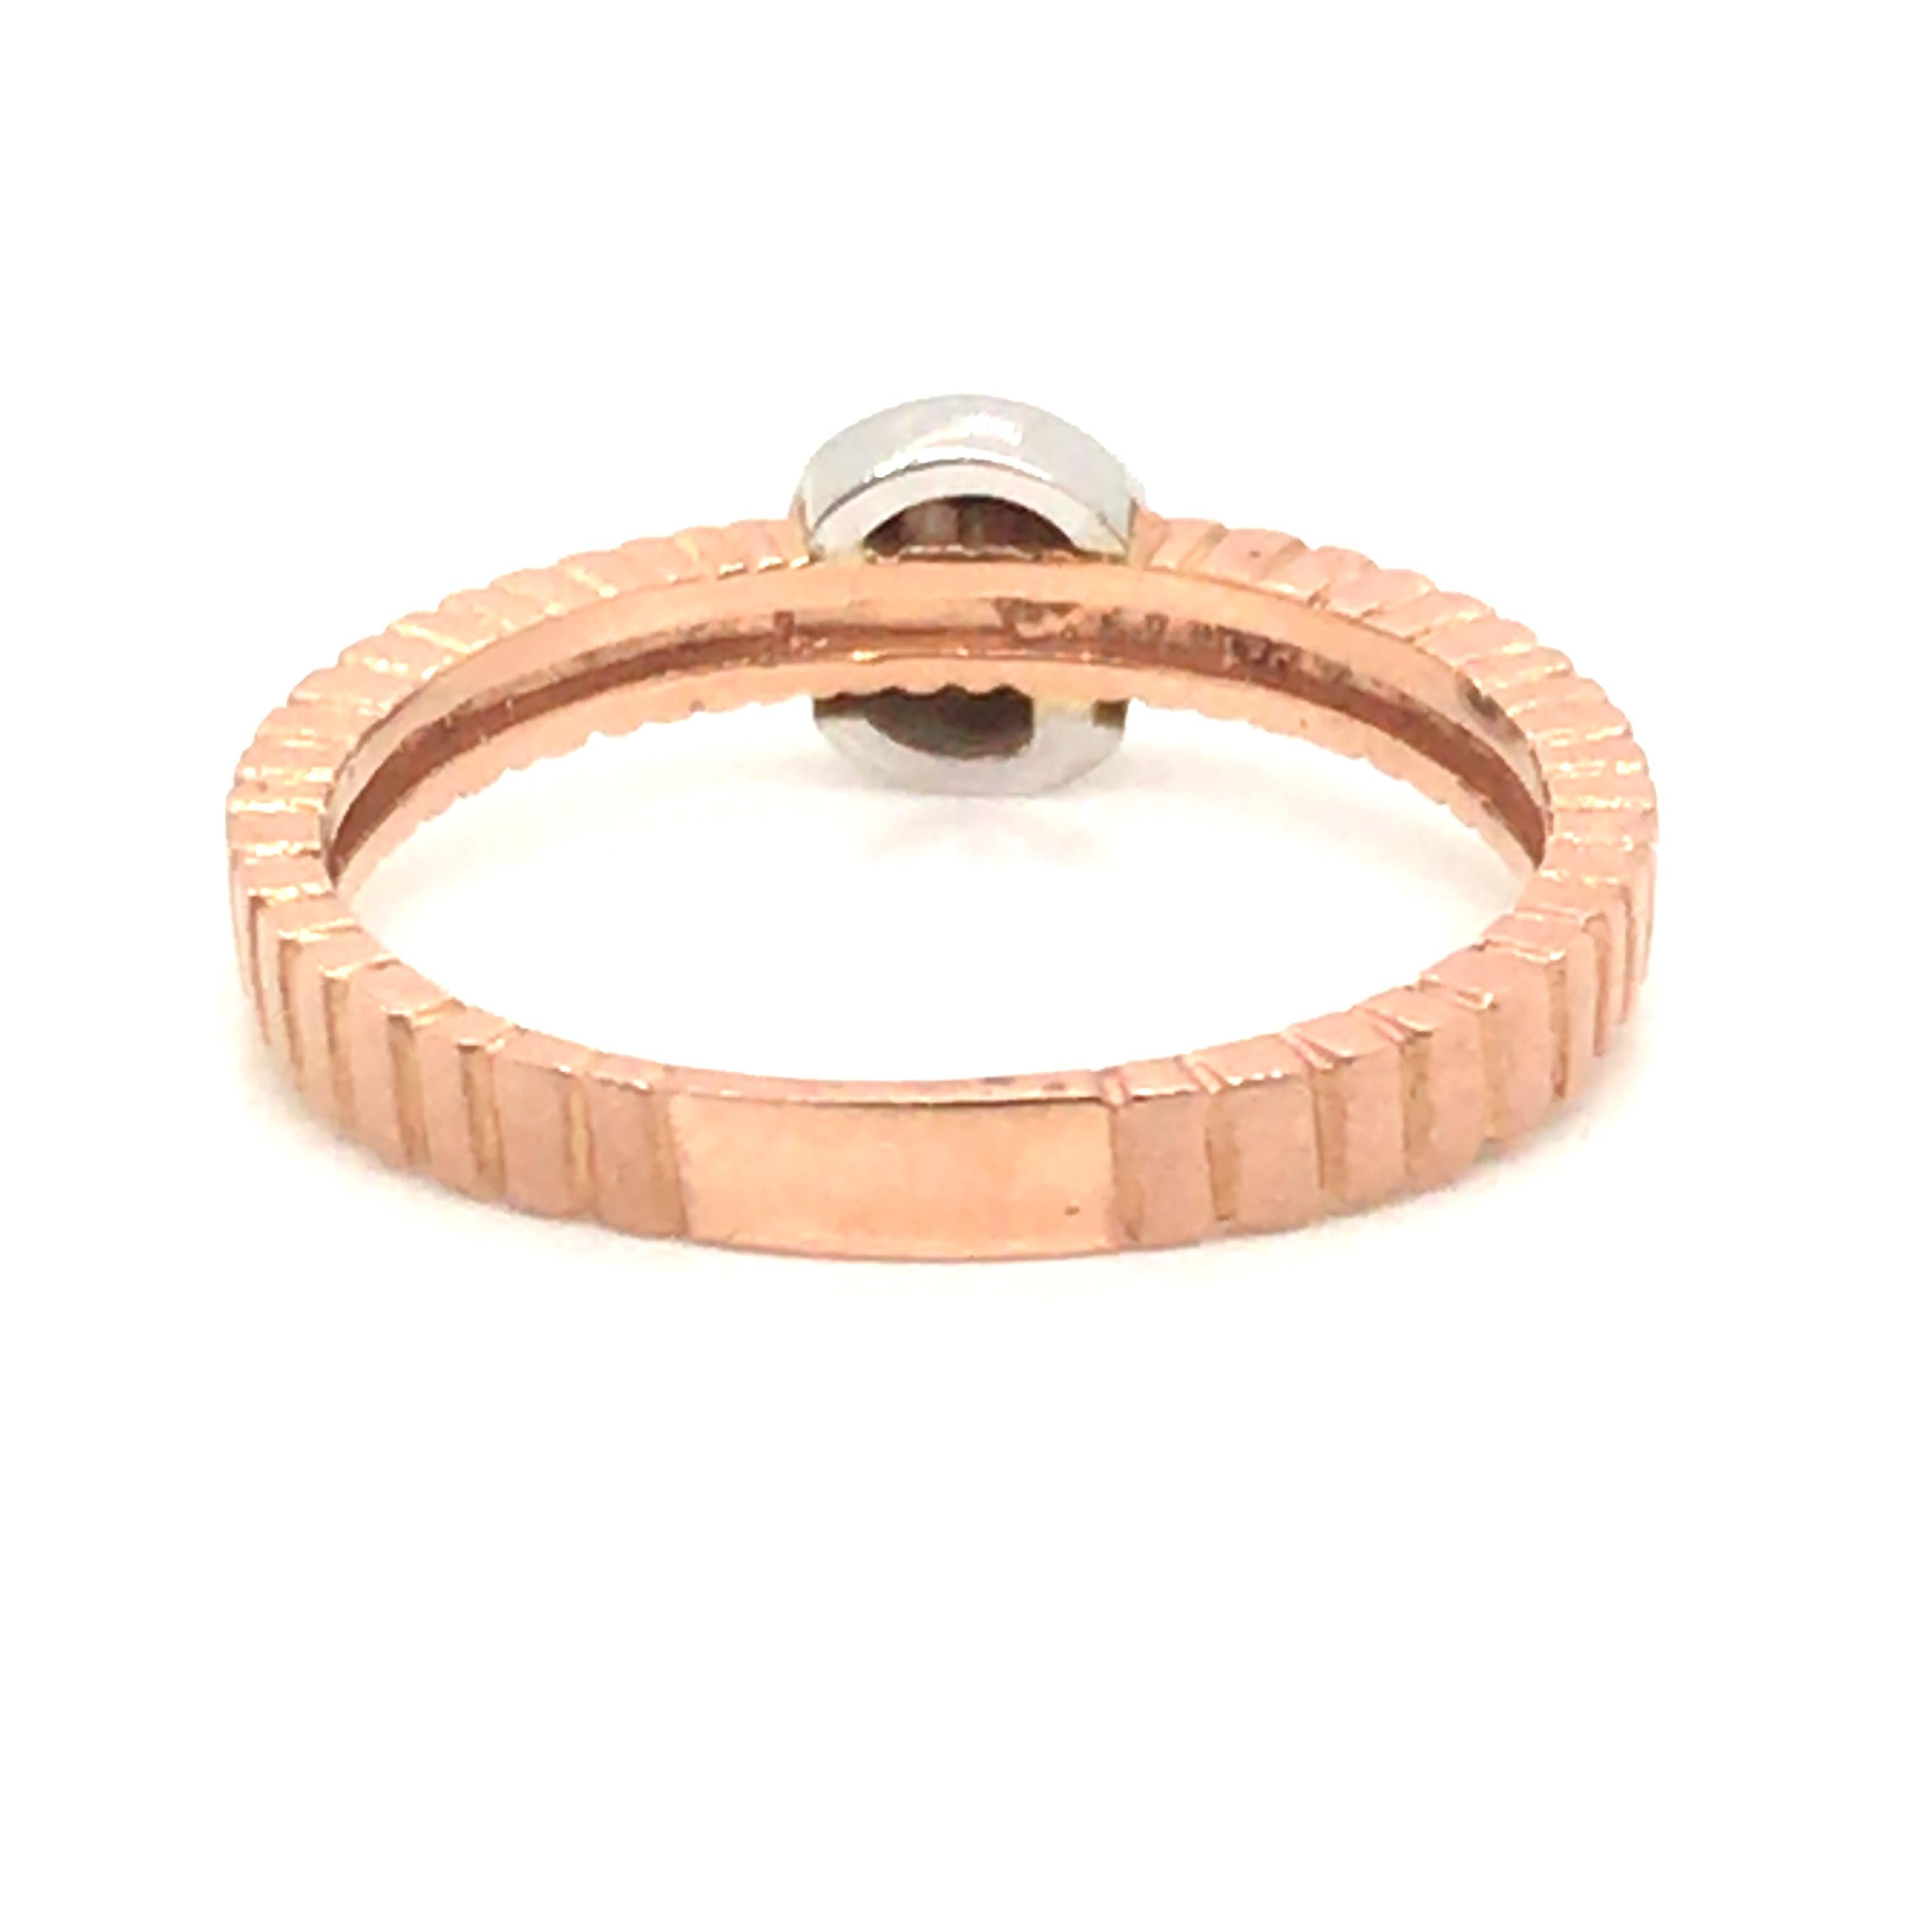 Round Cut Two-Tone Fashion Diamond Ring with 14 Karat Rose Gold and White Gold For Sale